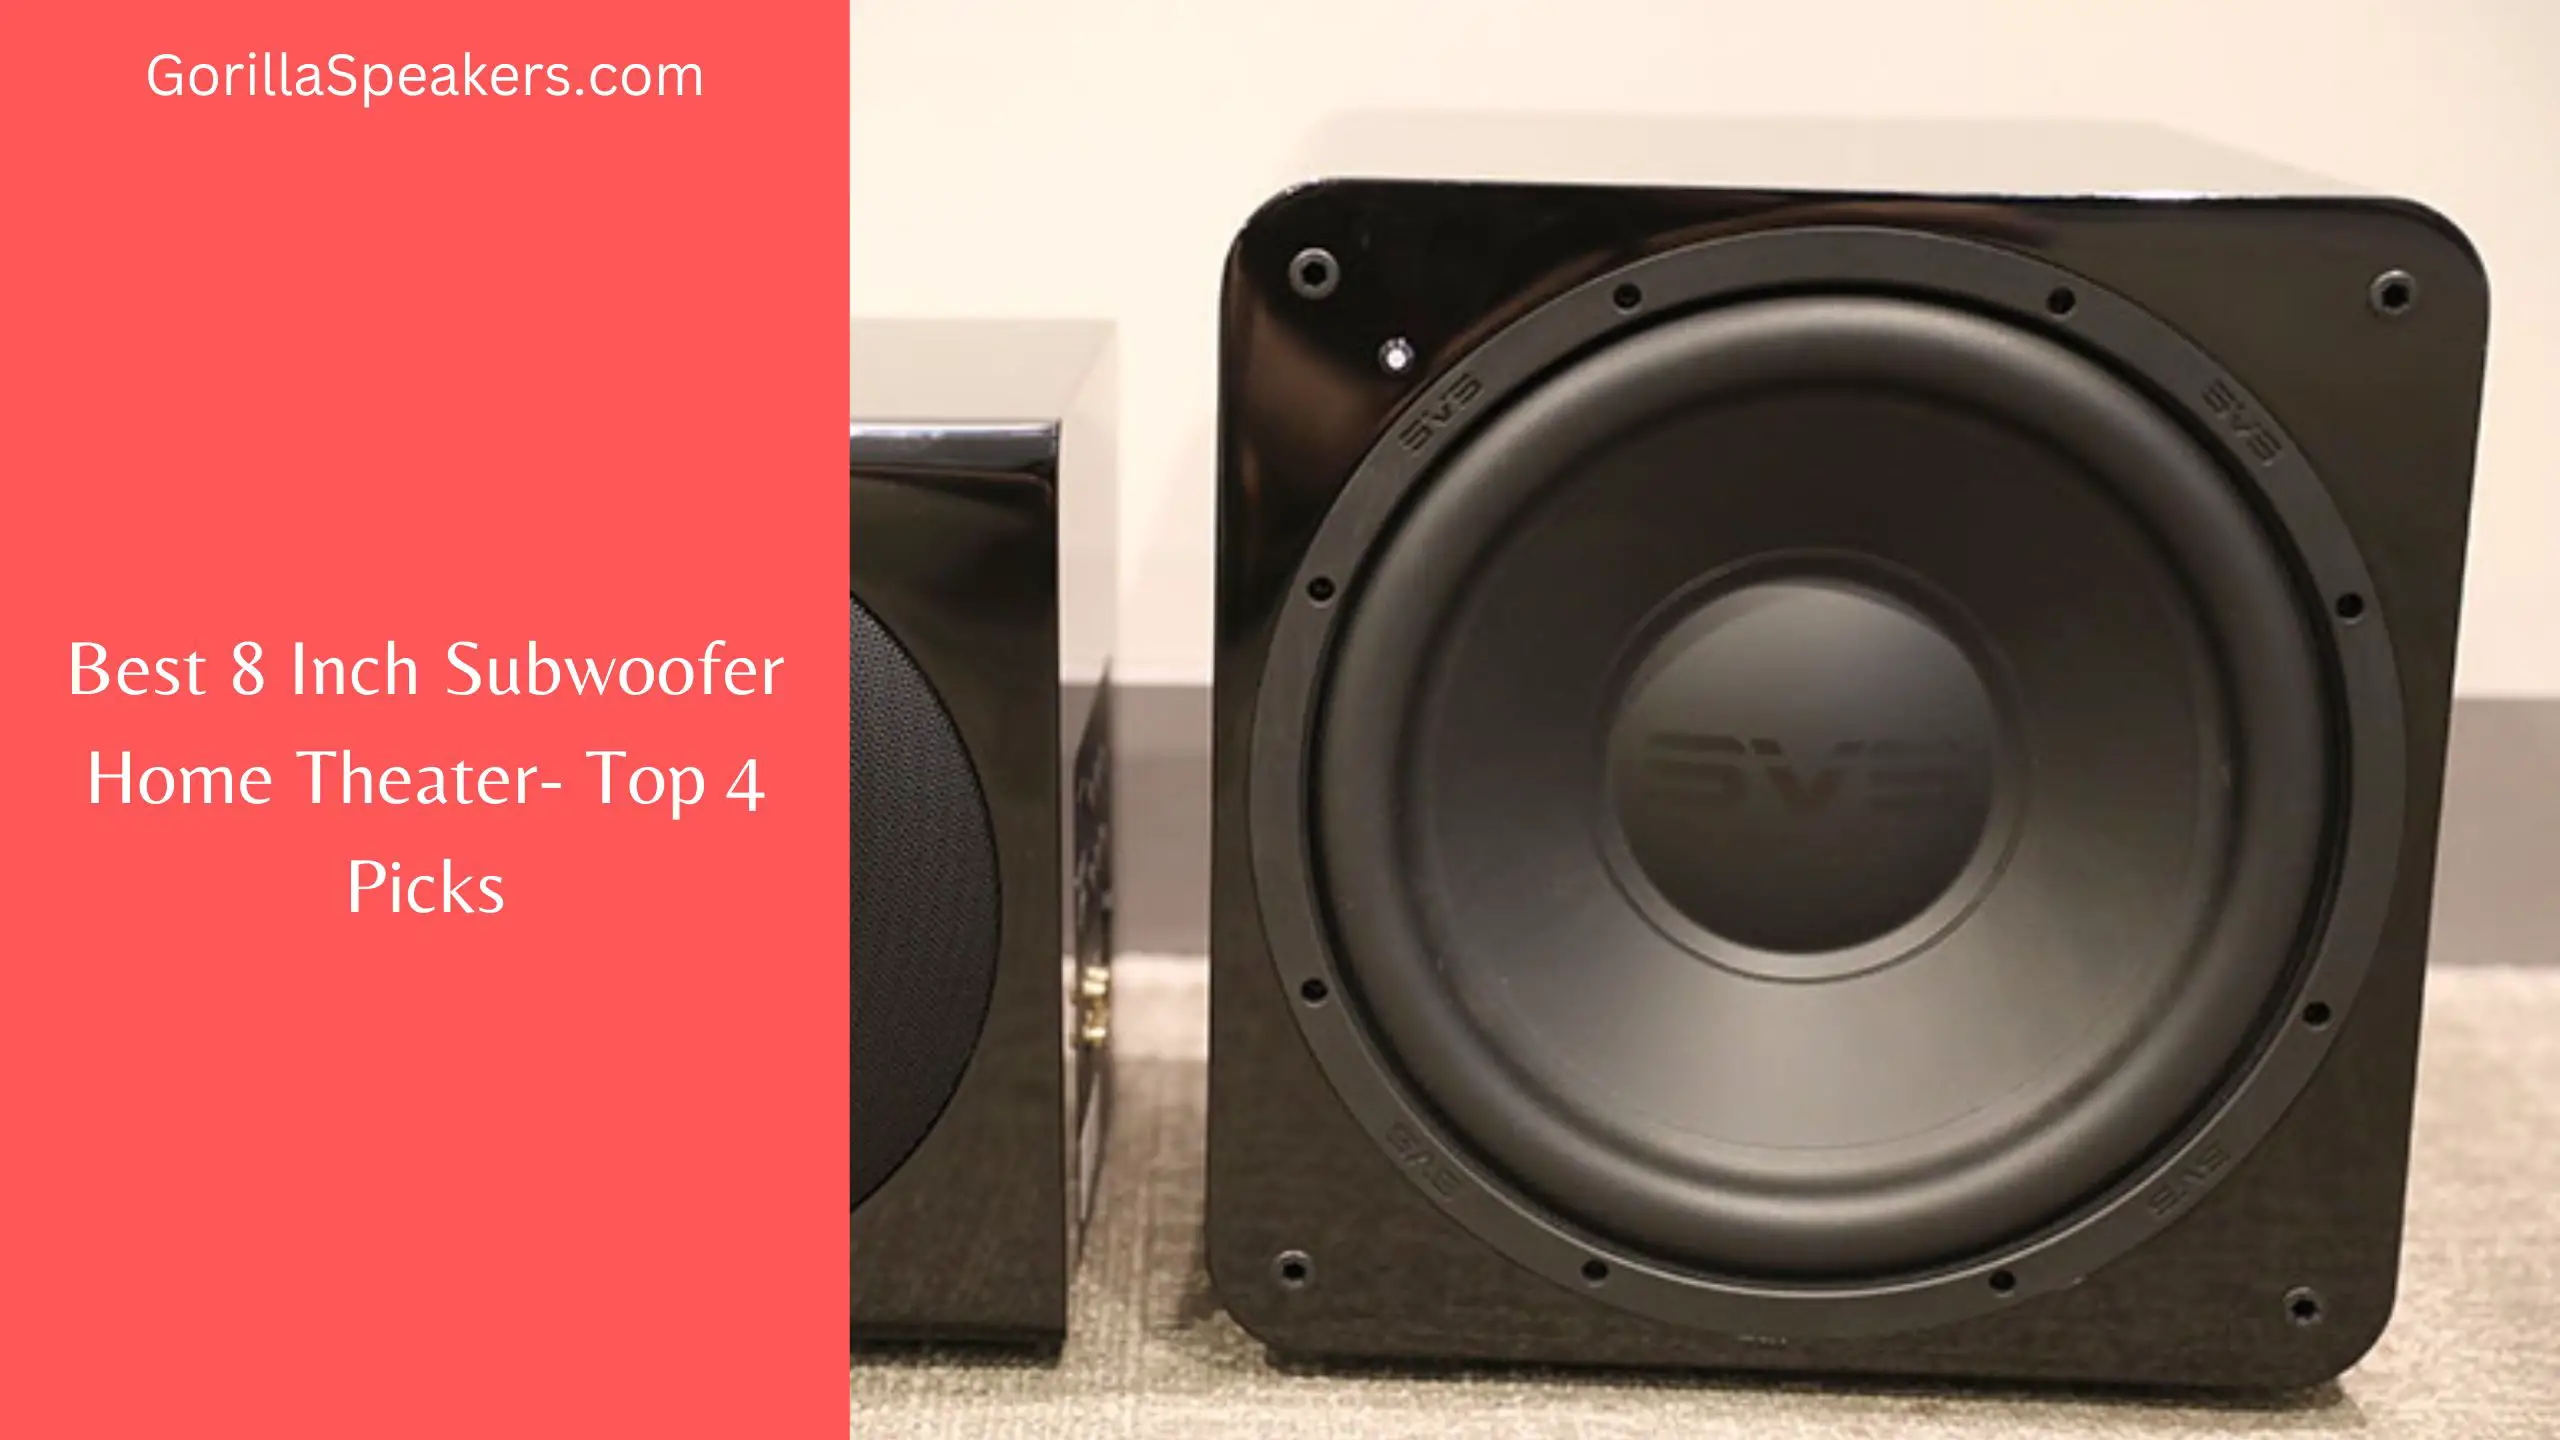 Best 8 Inch Subwoofer Home Theater- Top 4 Picks